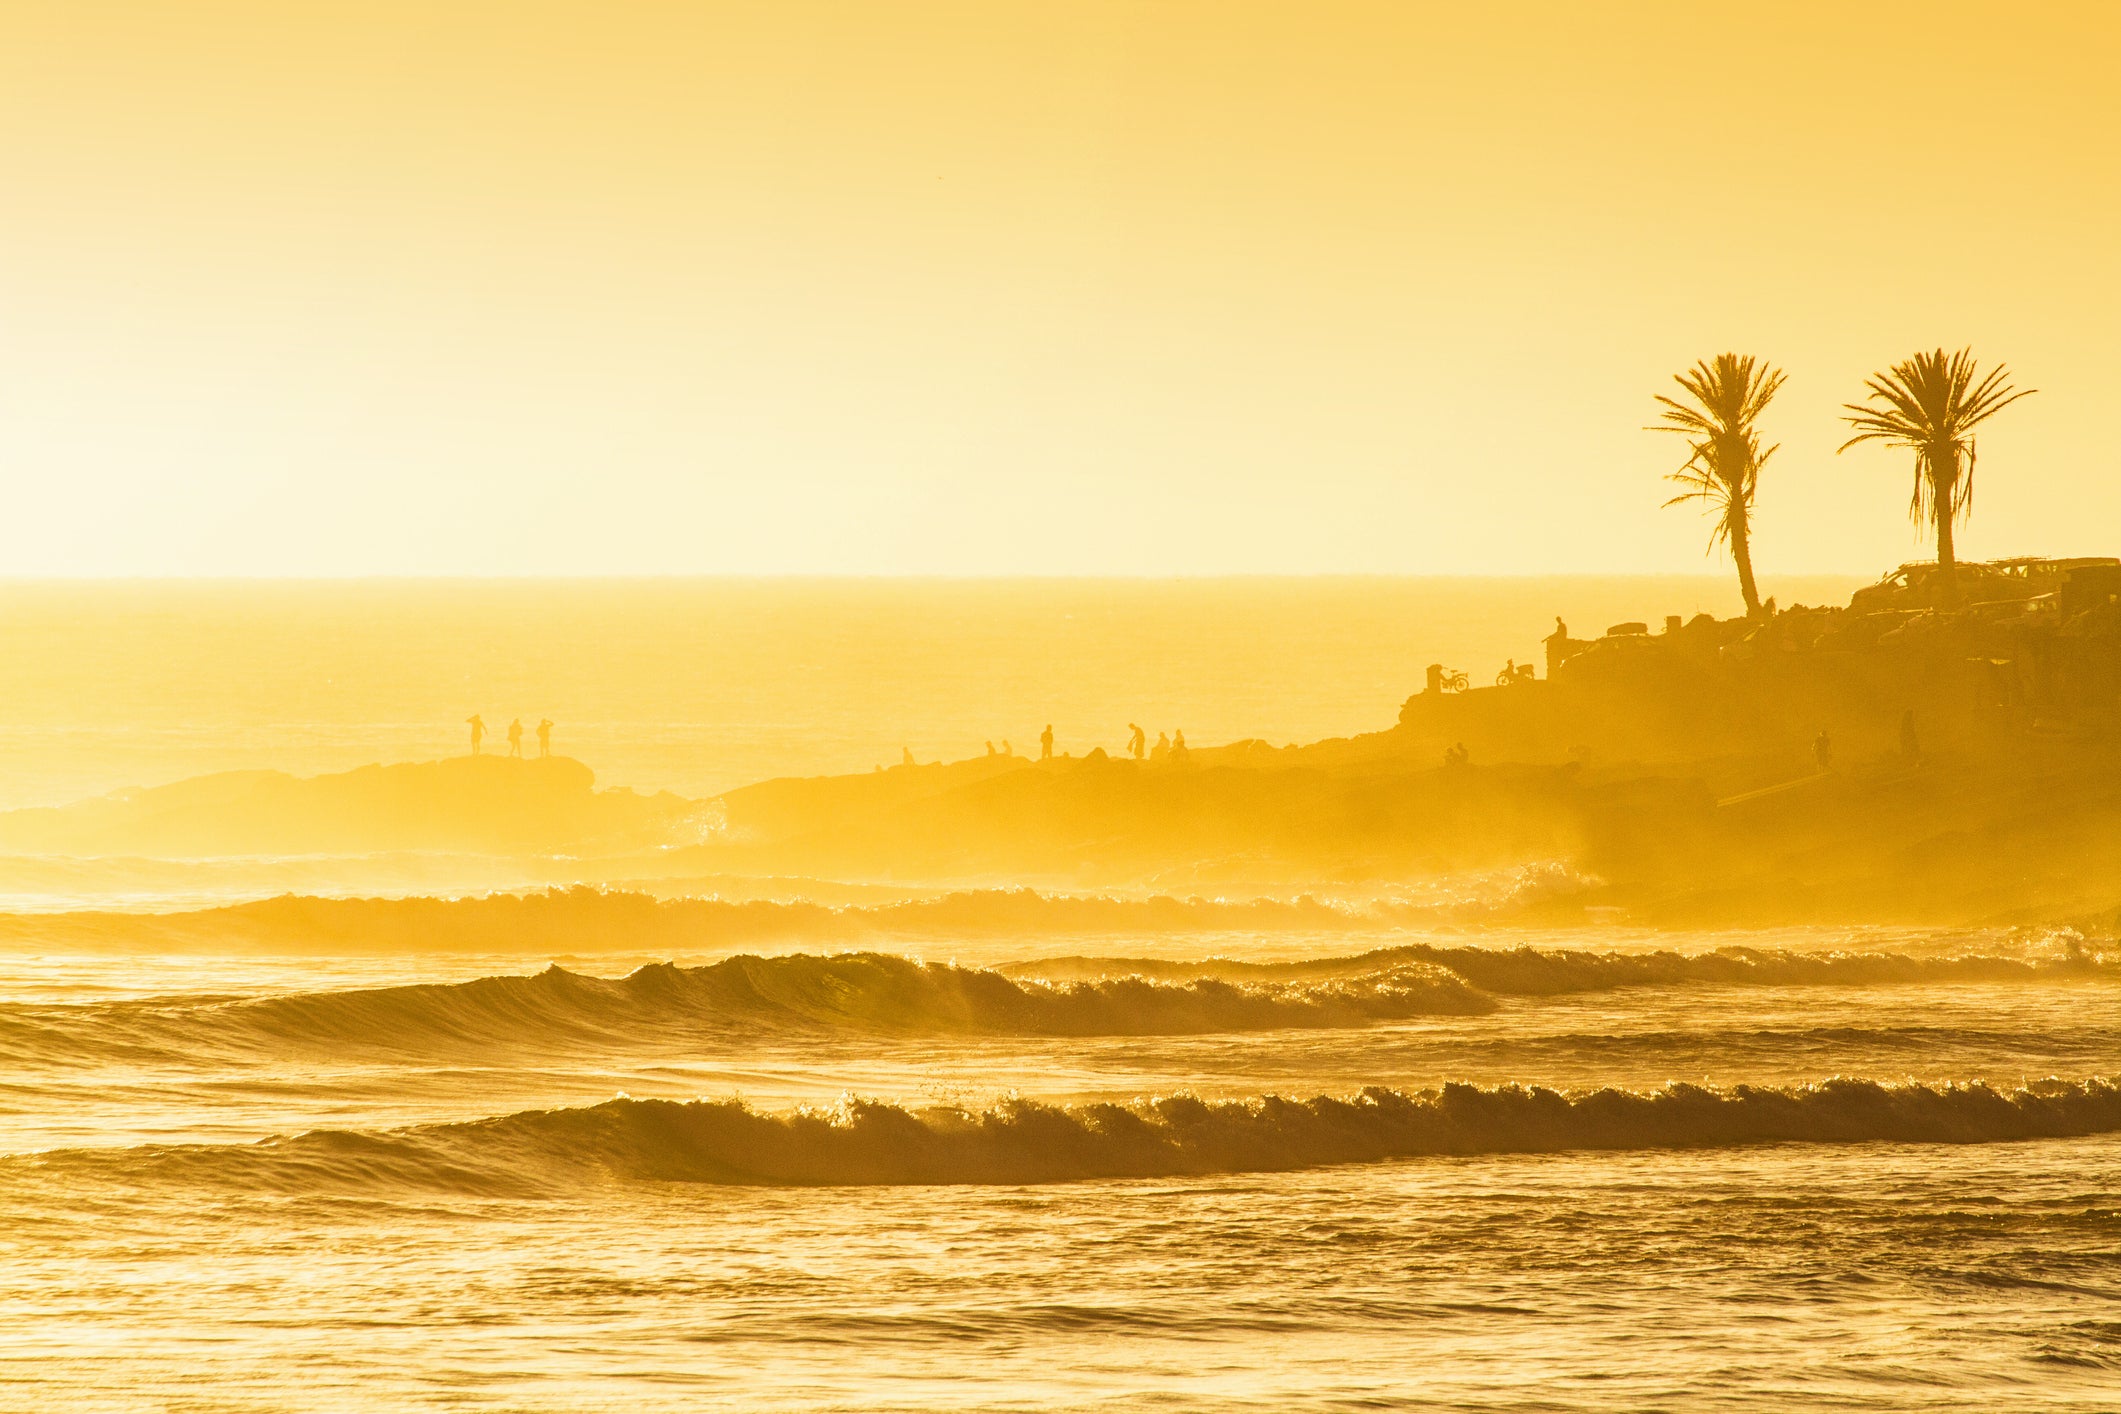 The famous Anchor Point has world-class breaks for avid surfers